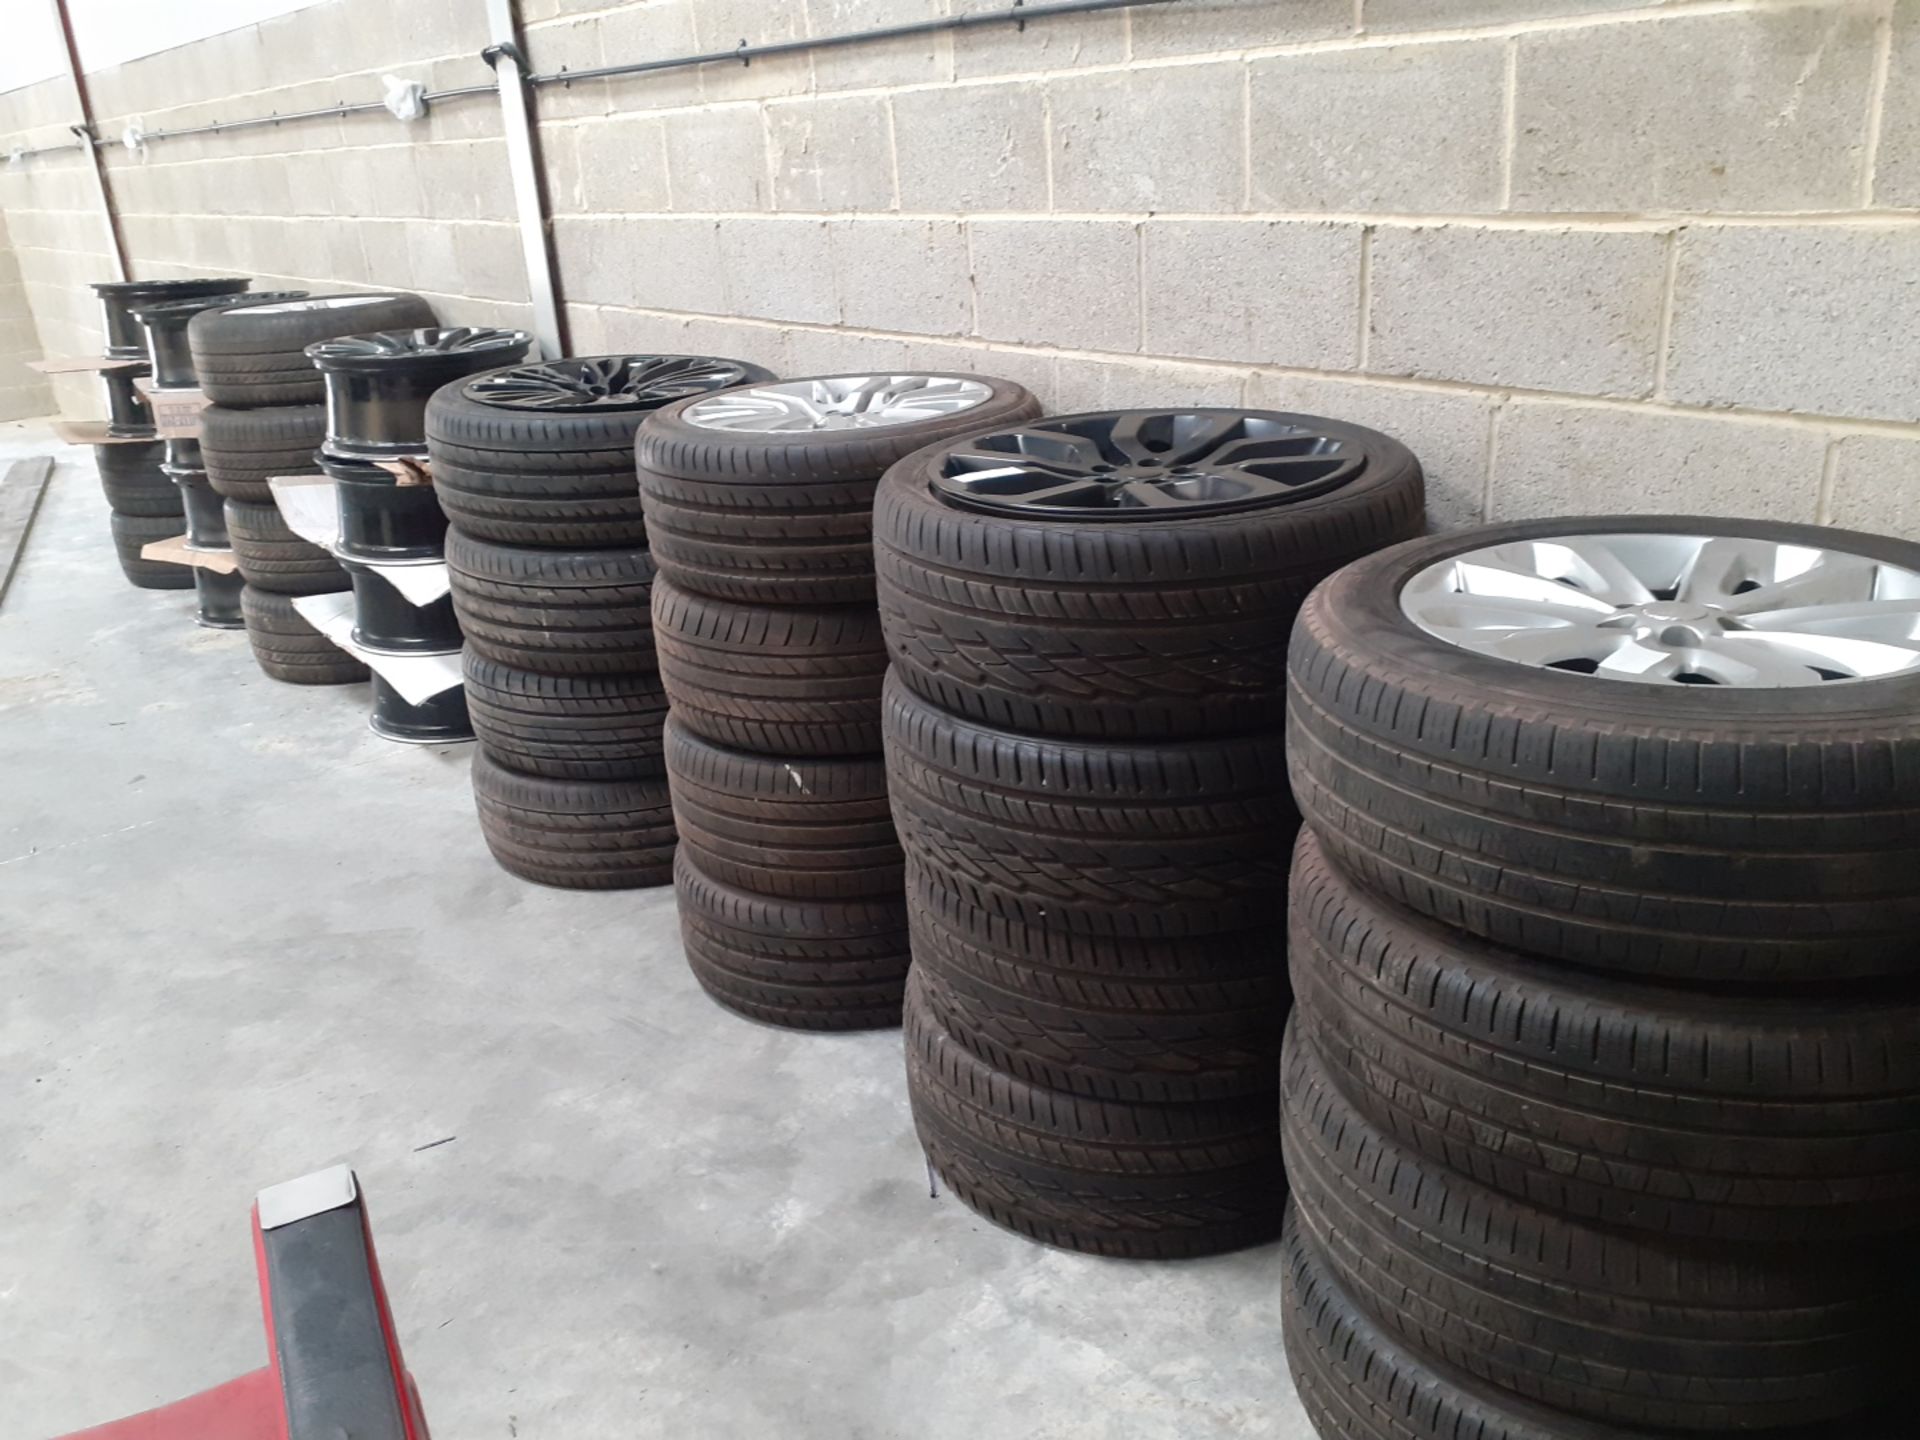 JOB LOT OF 30 SETS OF ALLOY WHEELS WITH TYRES, LAND ROVER RANGE ROVER, OVER £31K RRP *NO VAT* - Image 3 of 17